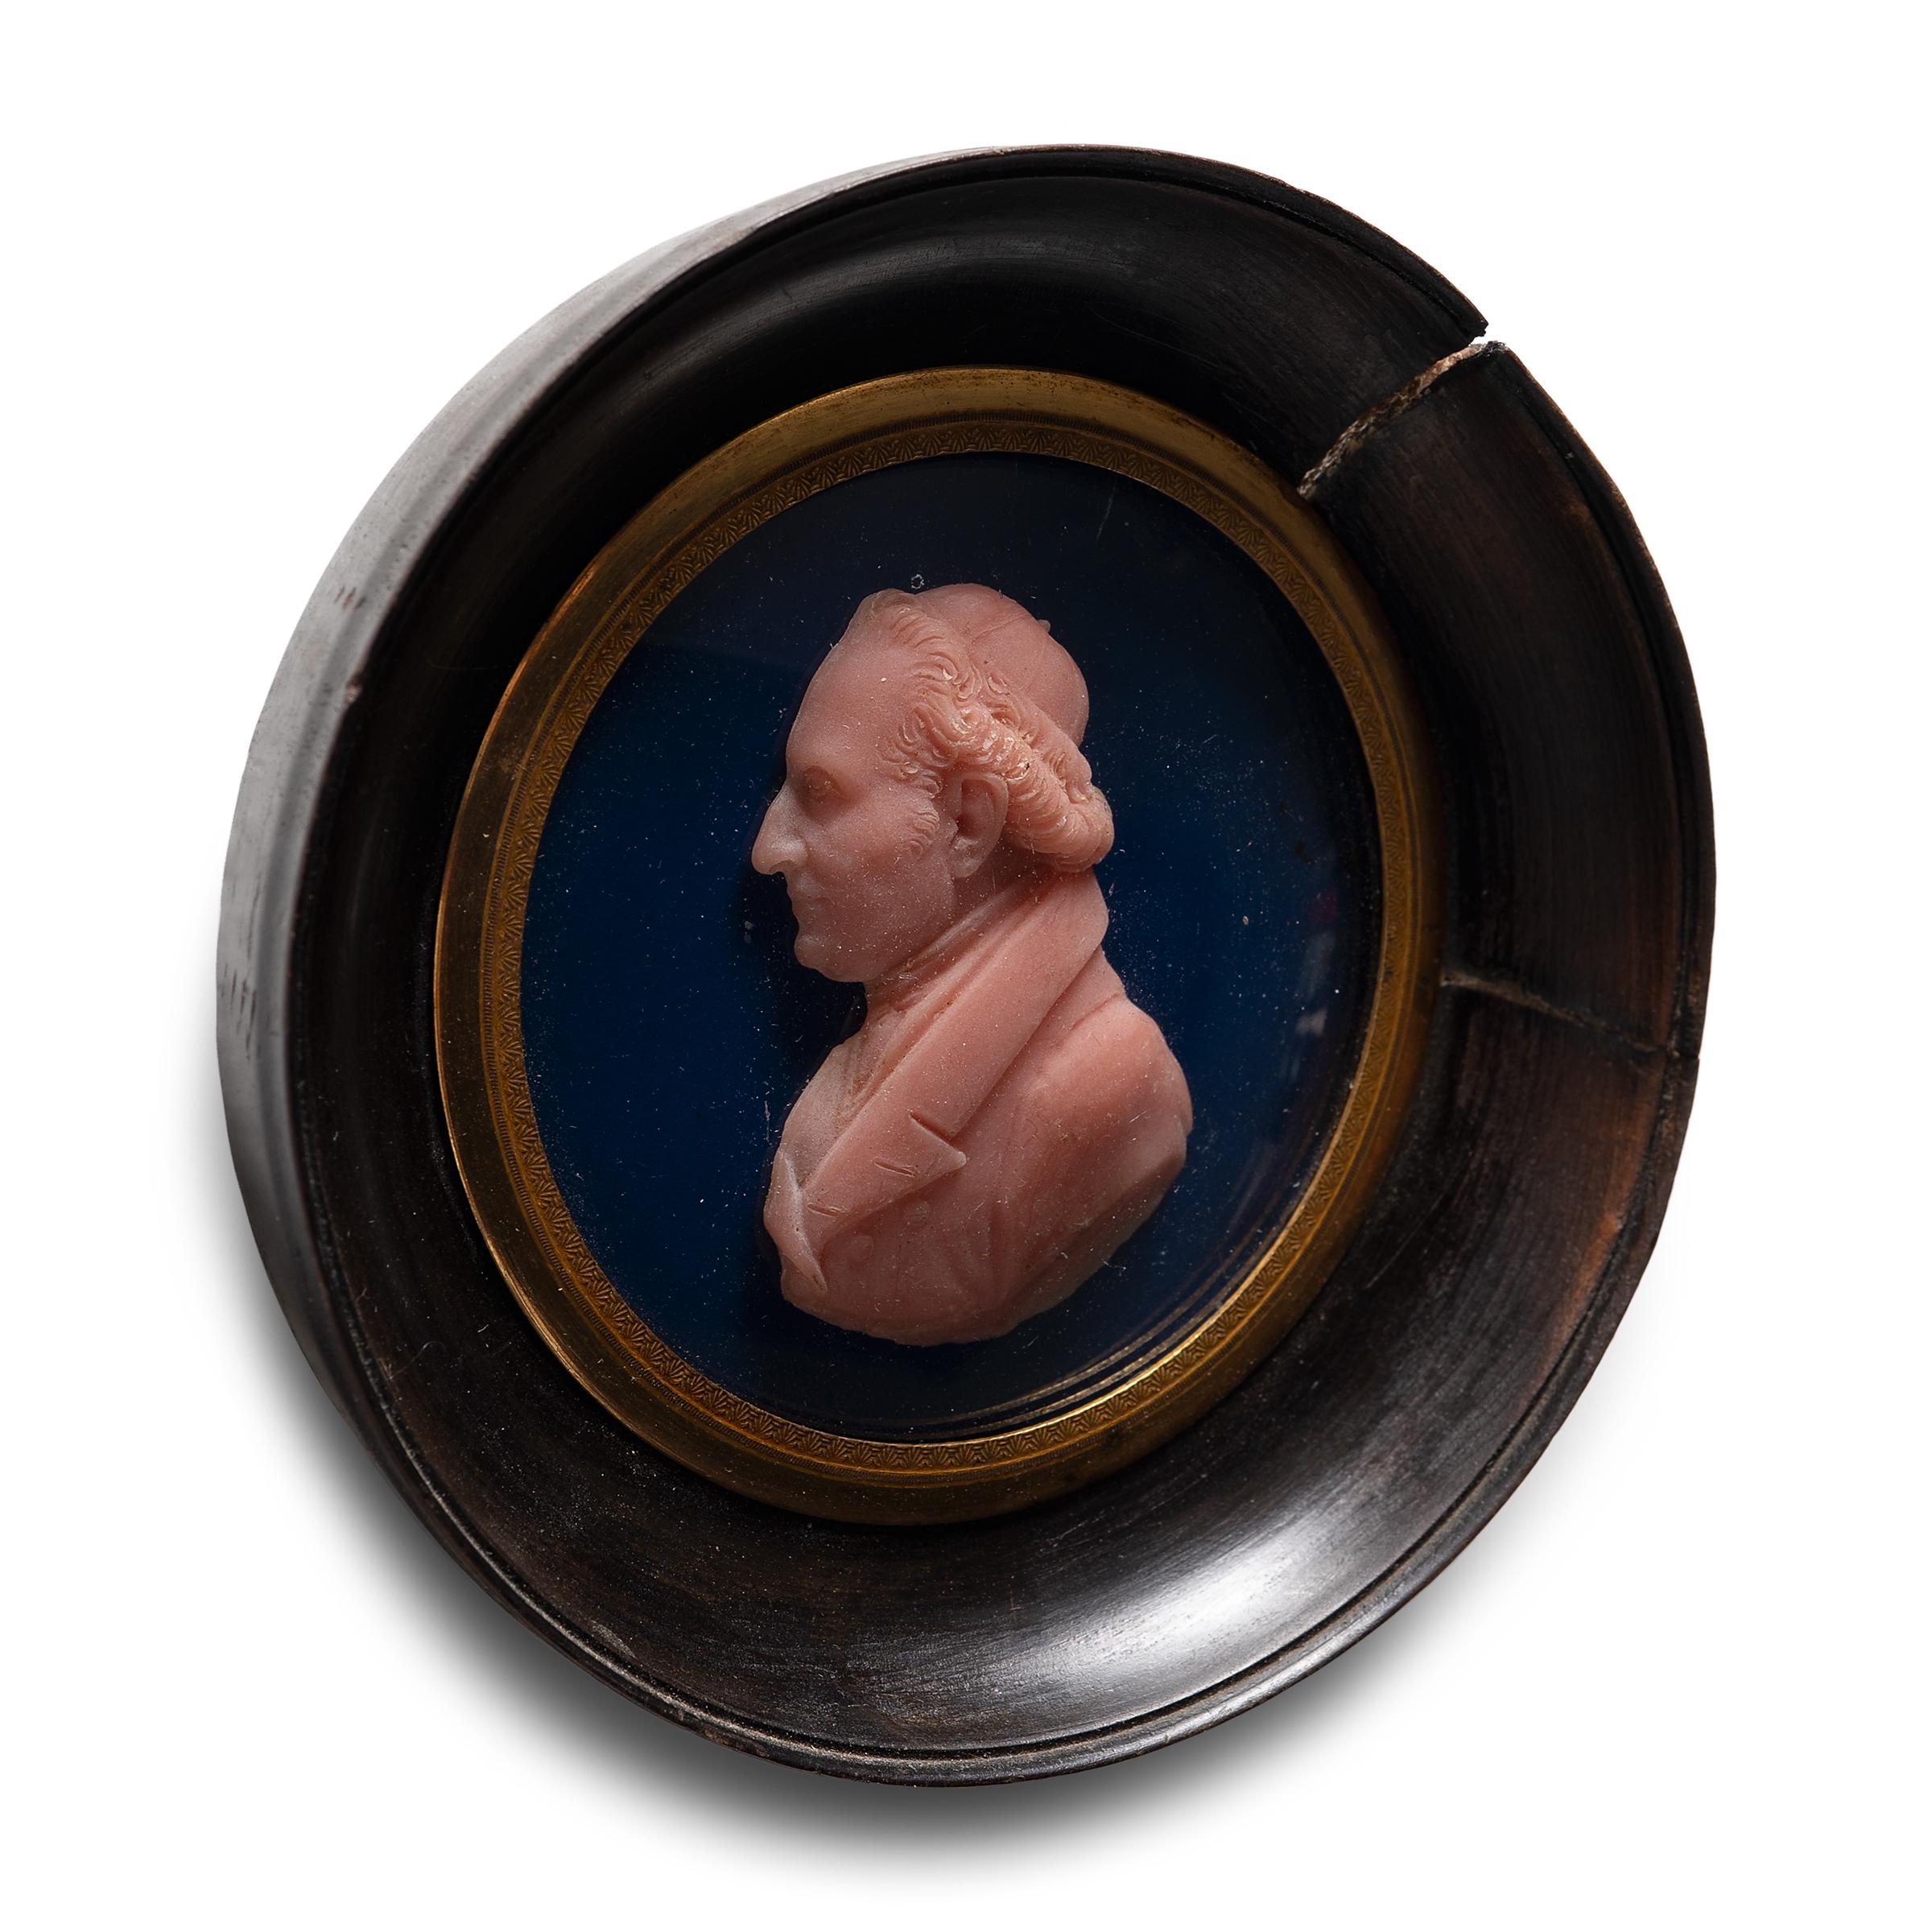 This is a beautiful example of the wax modeling work of 17th century Italian sculptor and painter, Francesco Pozzi. Made with stunning attention to detail, wax is one of the earliest known mediums for portraiture. Miniature wax portraits were first